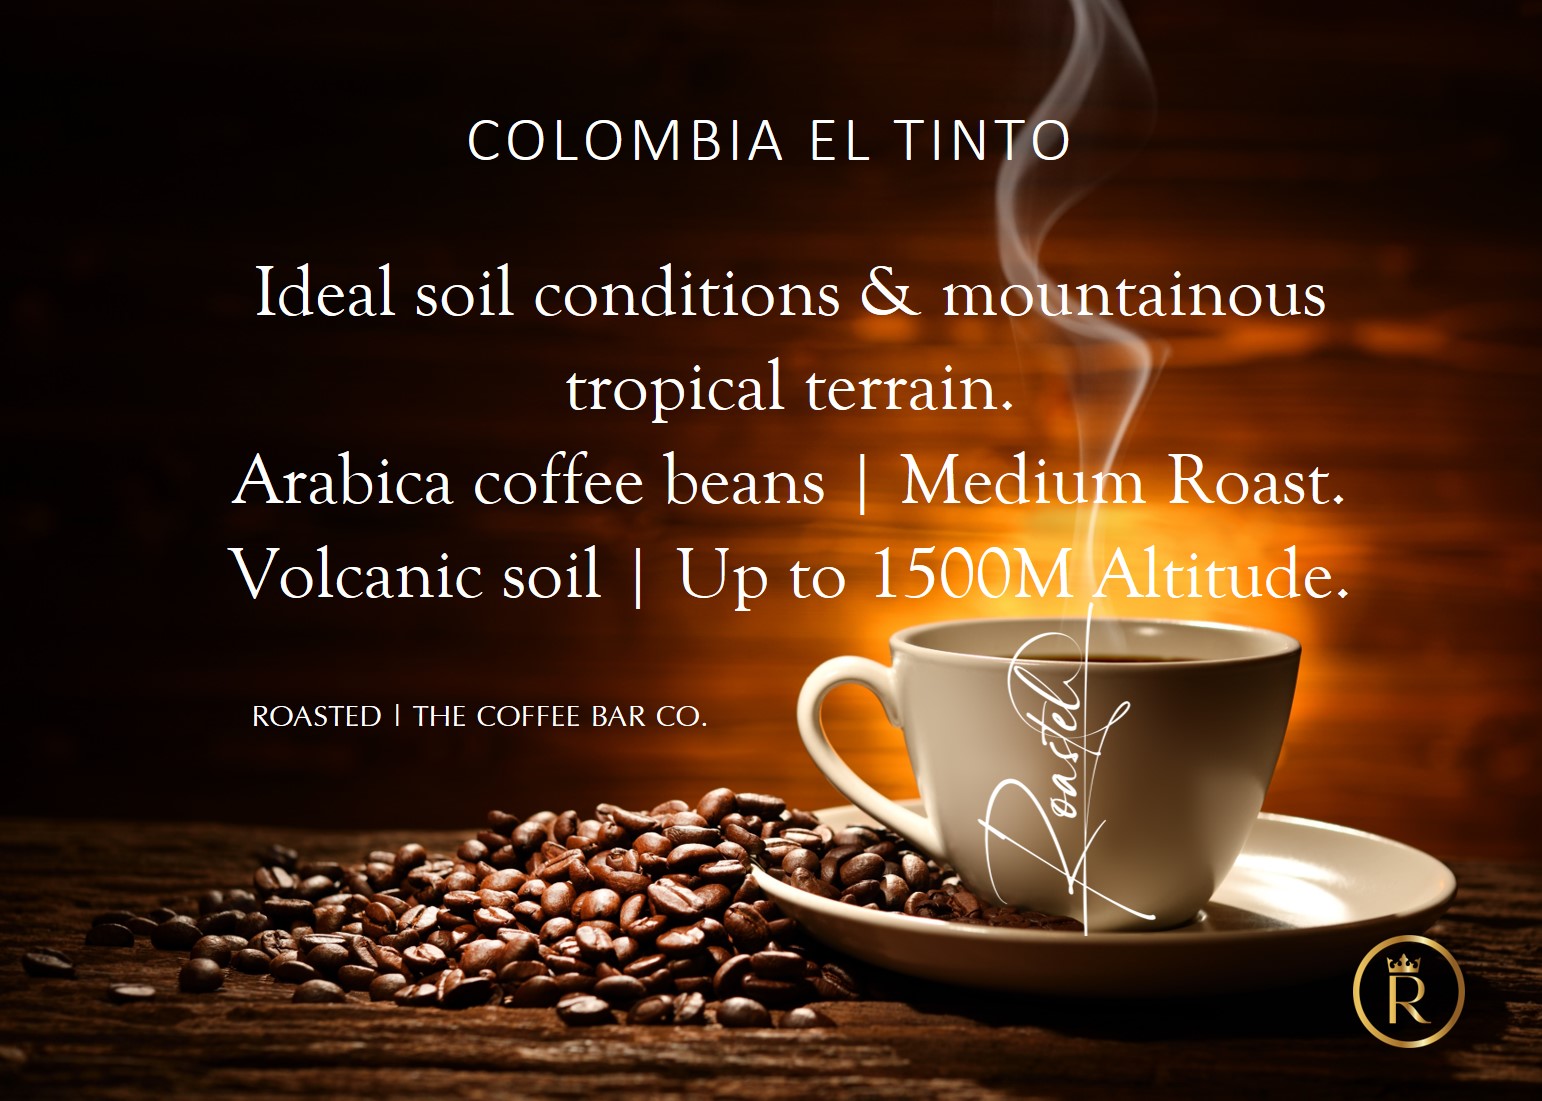 COLOMBIA EL TINTO – ROASTED | THE COFFEE BAR CO.